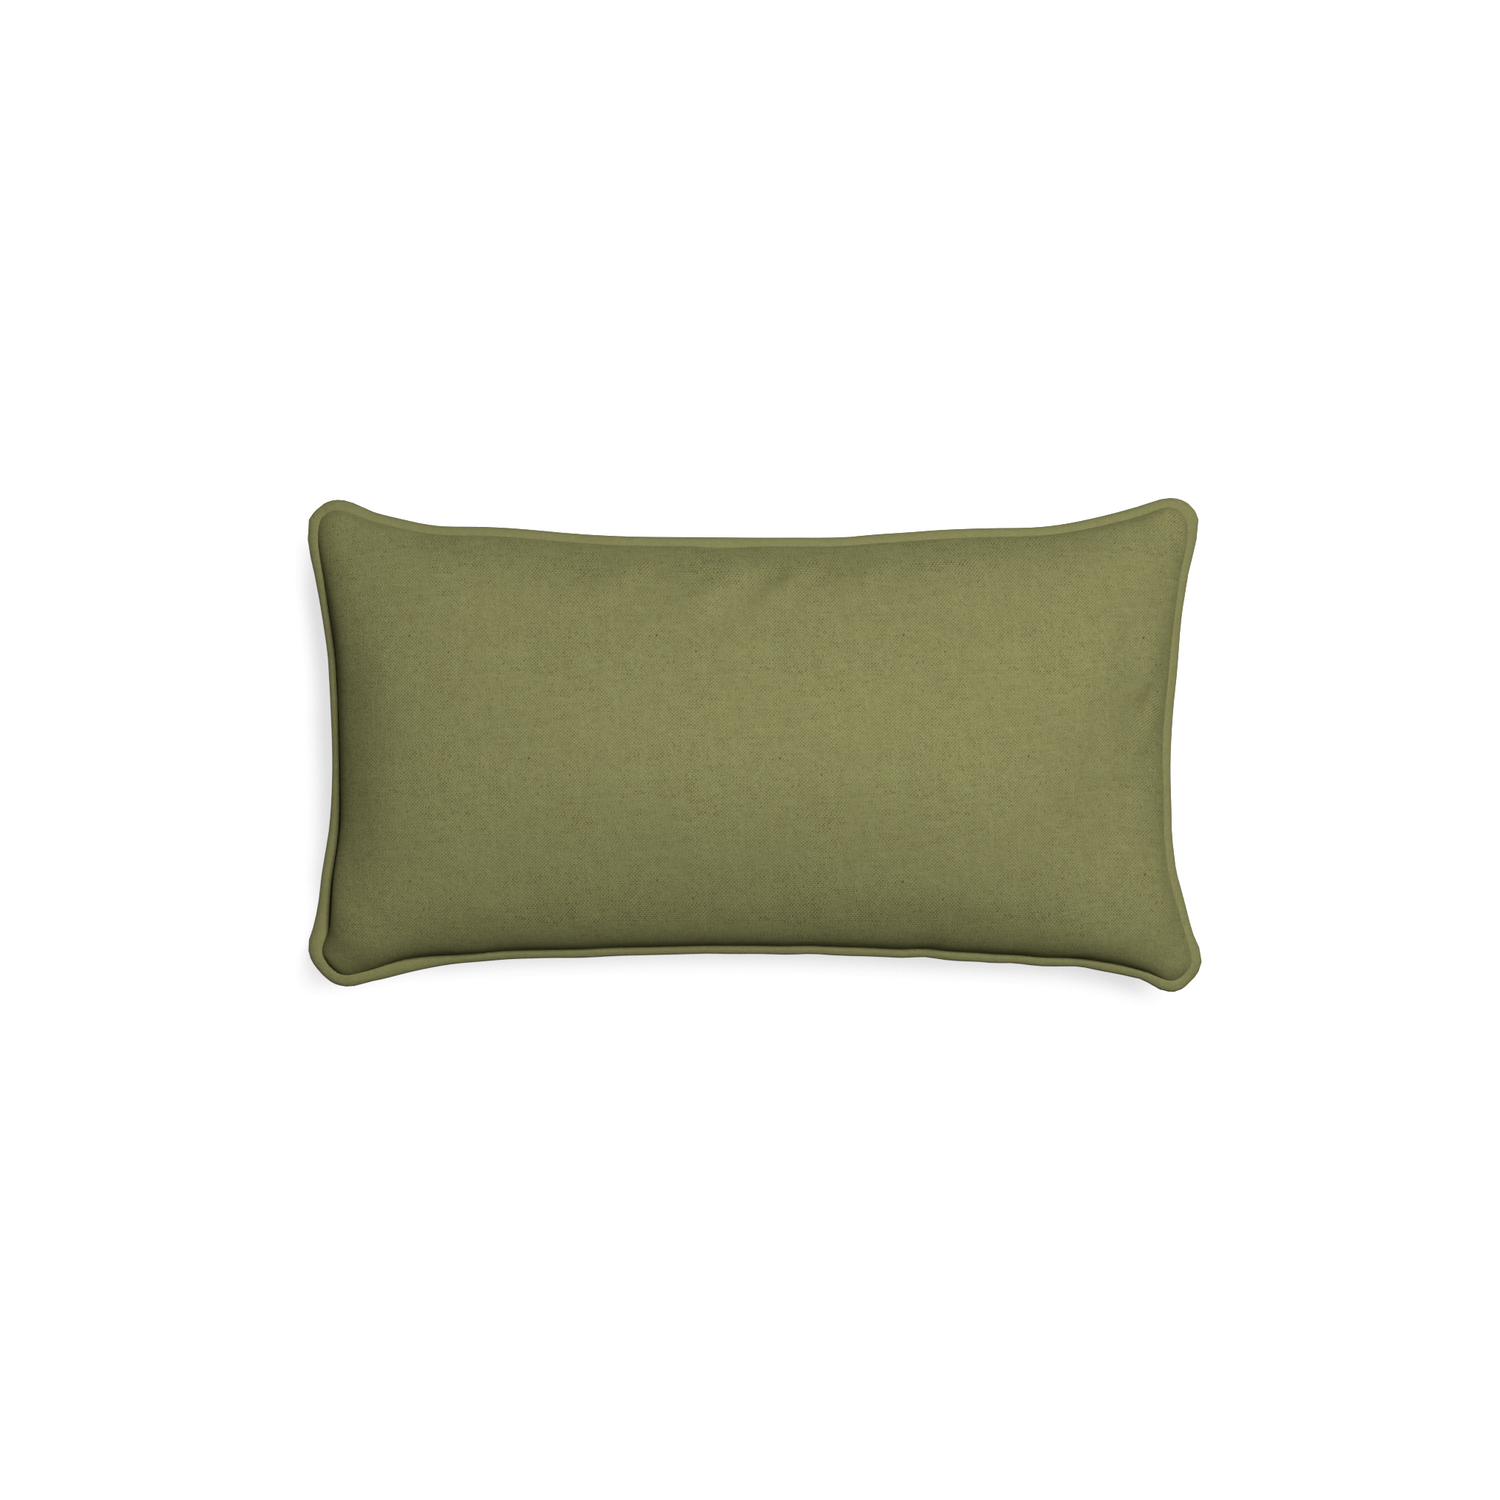 rectangle moss green pillow with moss green piping